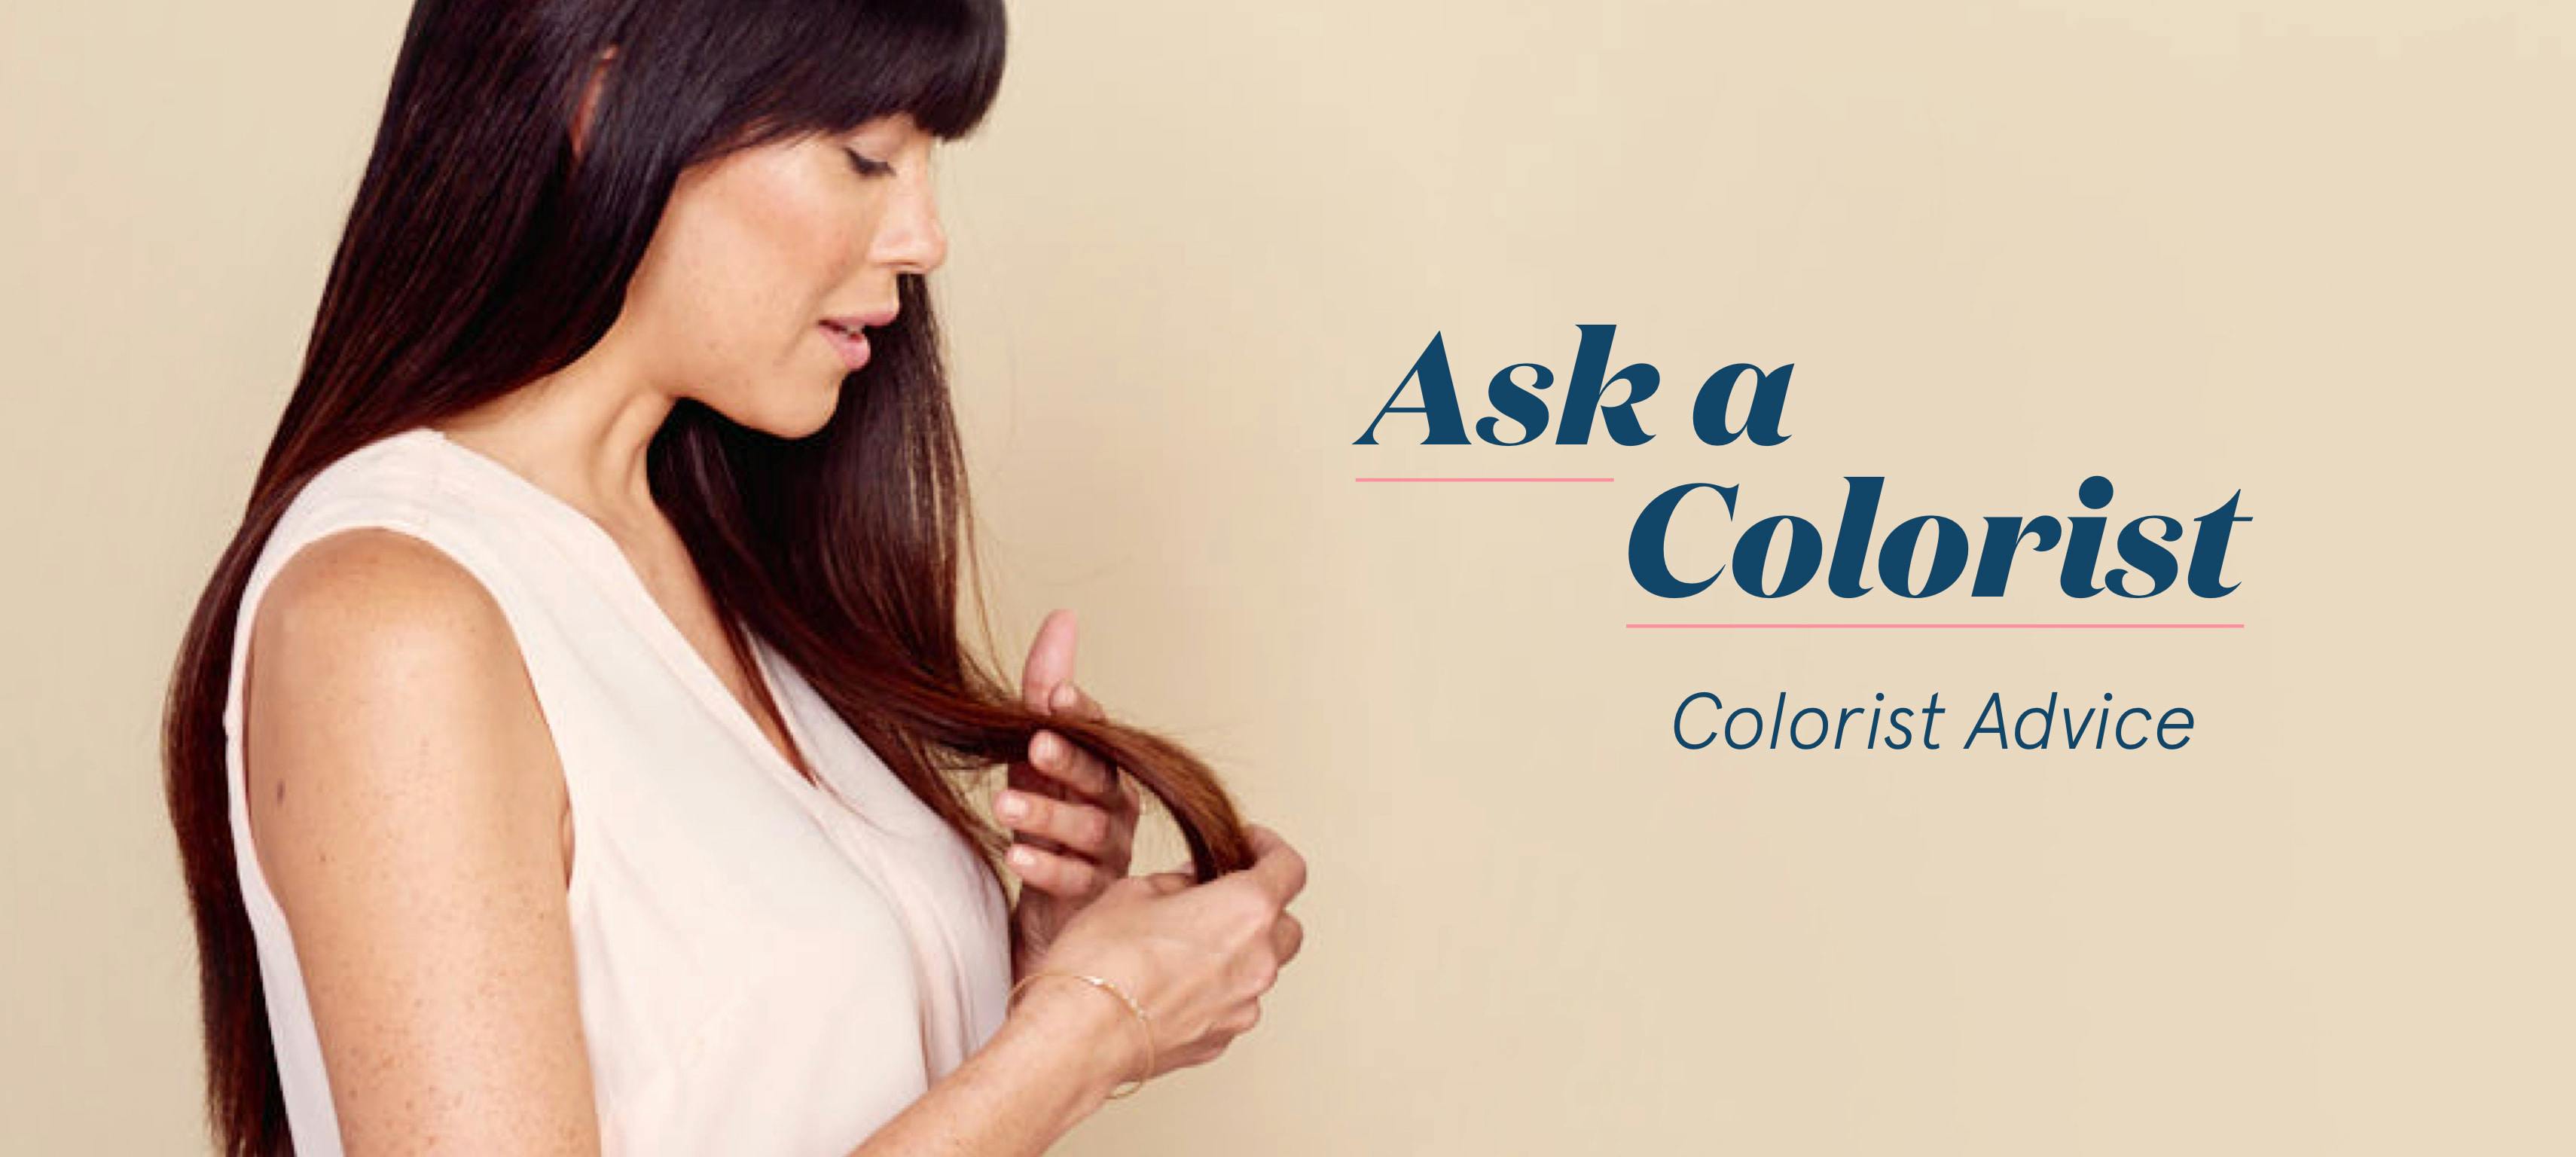 Color Correction: Removing Years of Black Box Color  Hair color remover,  Removing black hair dye, Black hair dye